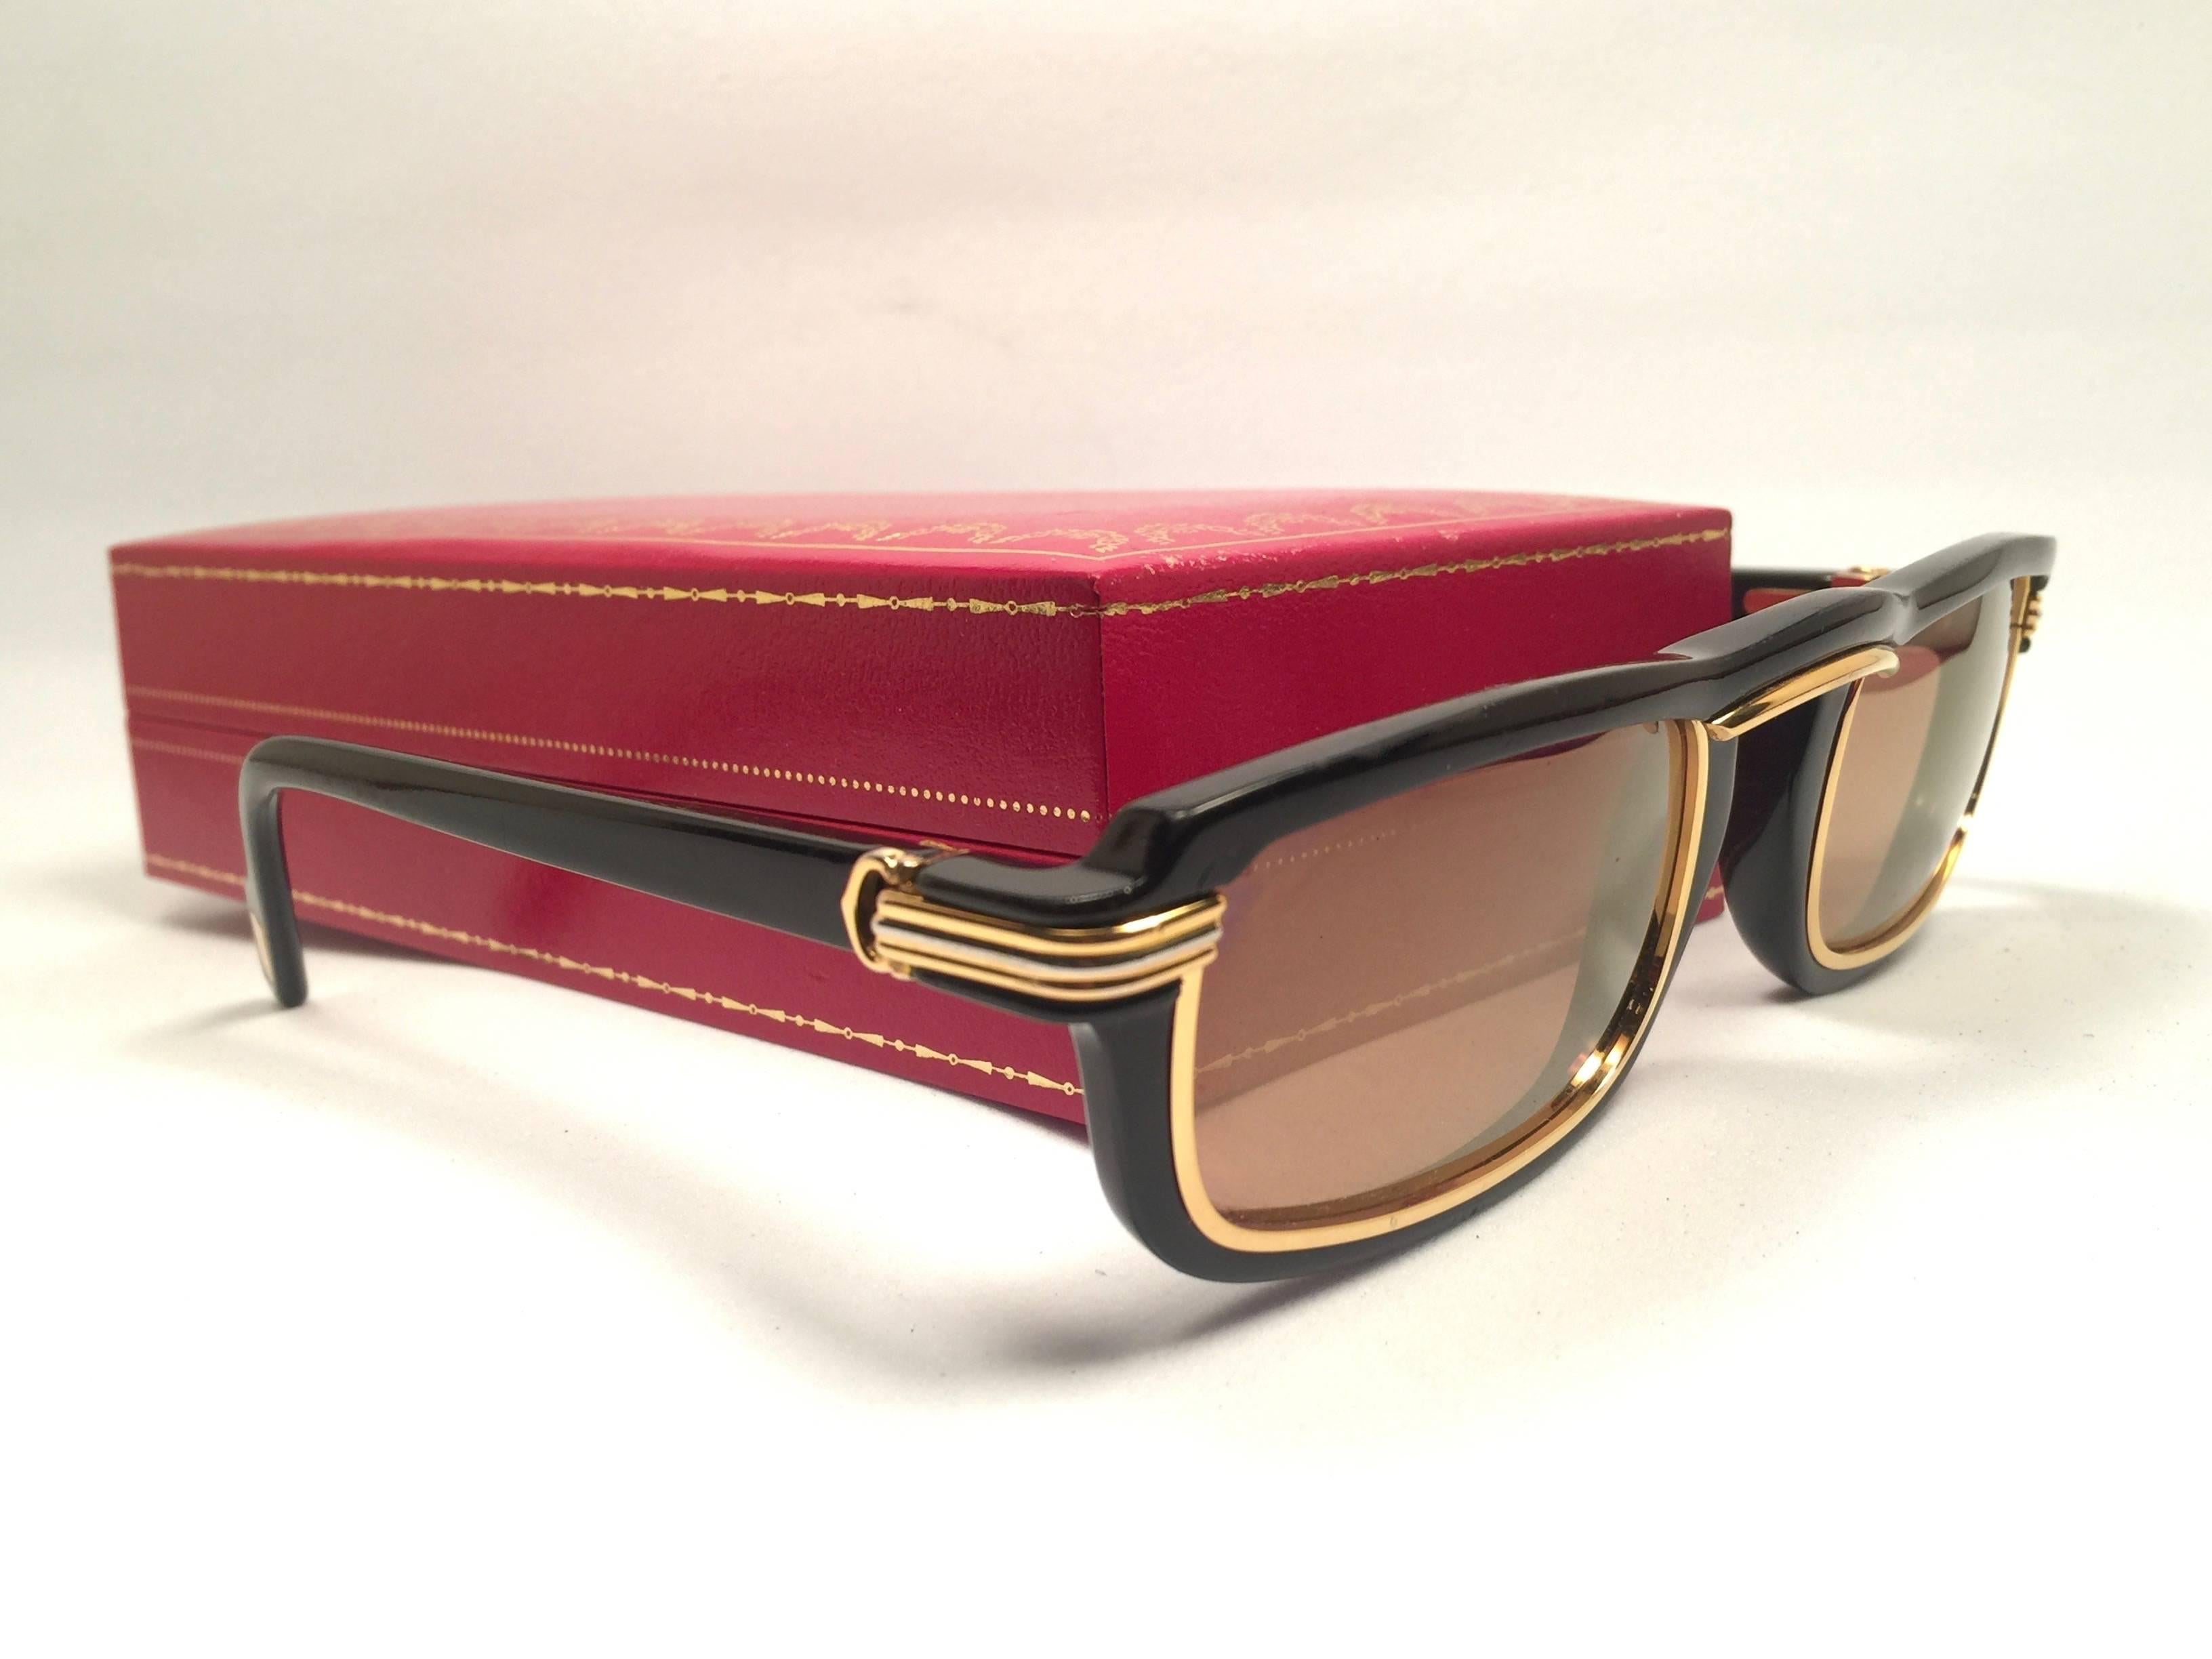 New 1991 Original Cartier Vertigo Art Deco Sunglasses with slight mirrored  (uv protection) lenses.
Frame has the famous real gold and white gold accents in the middle and on the sides.
All hallmarks. Cartier gold signs on the earpaddles. Both arms